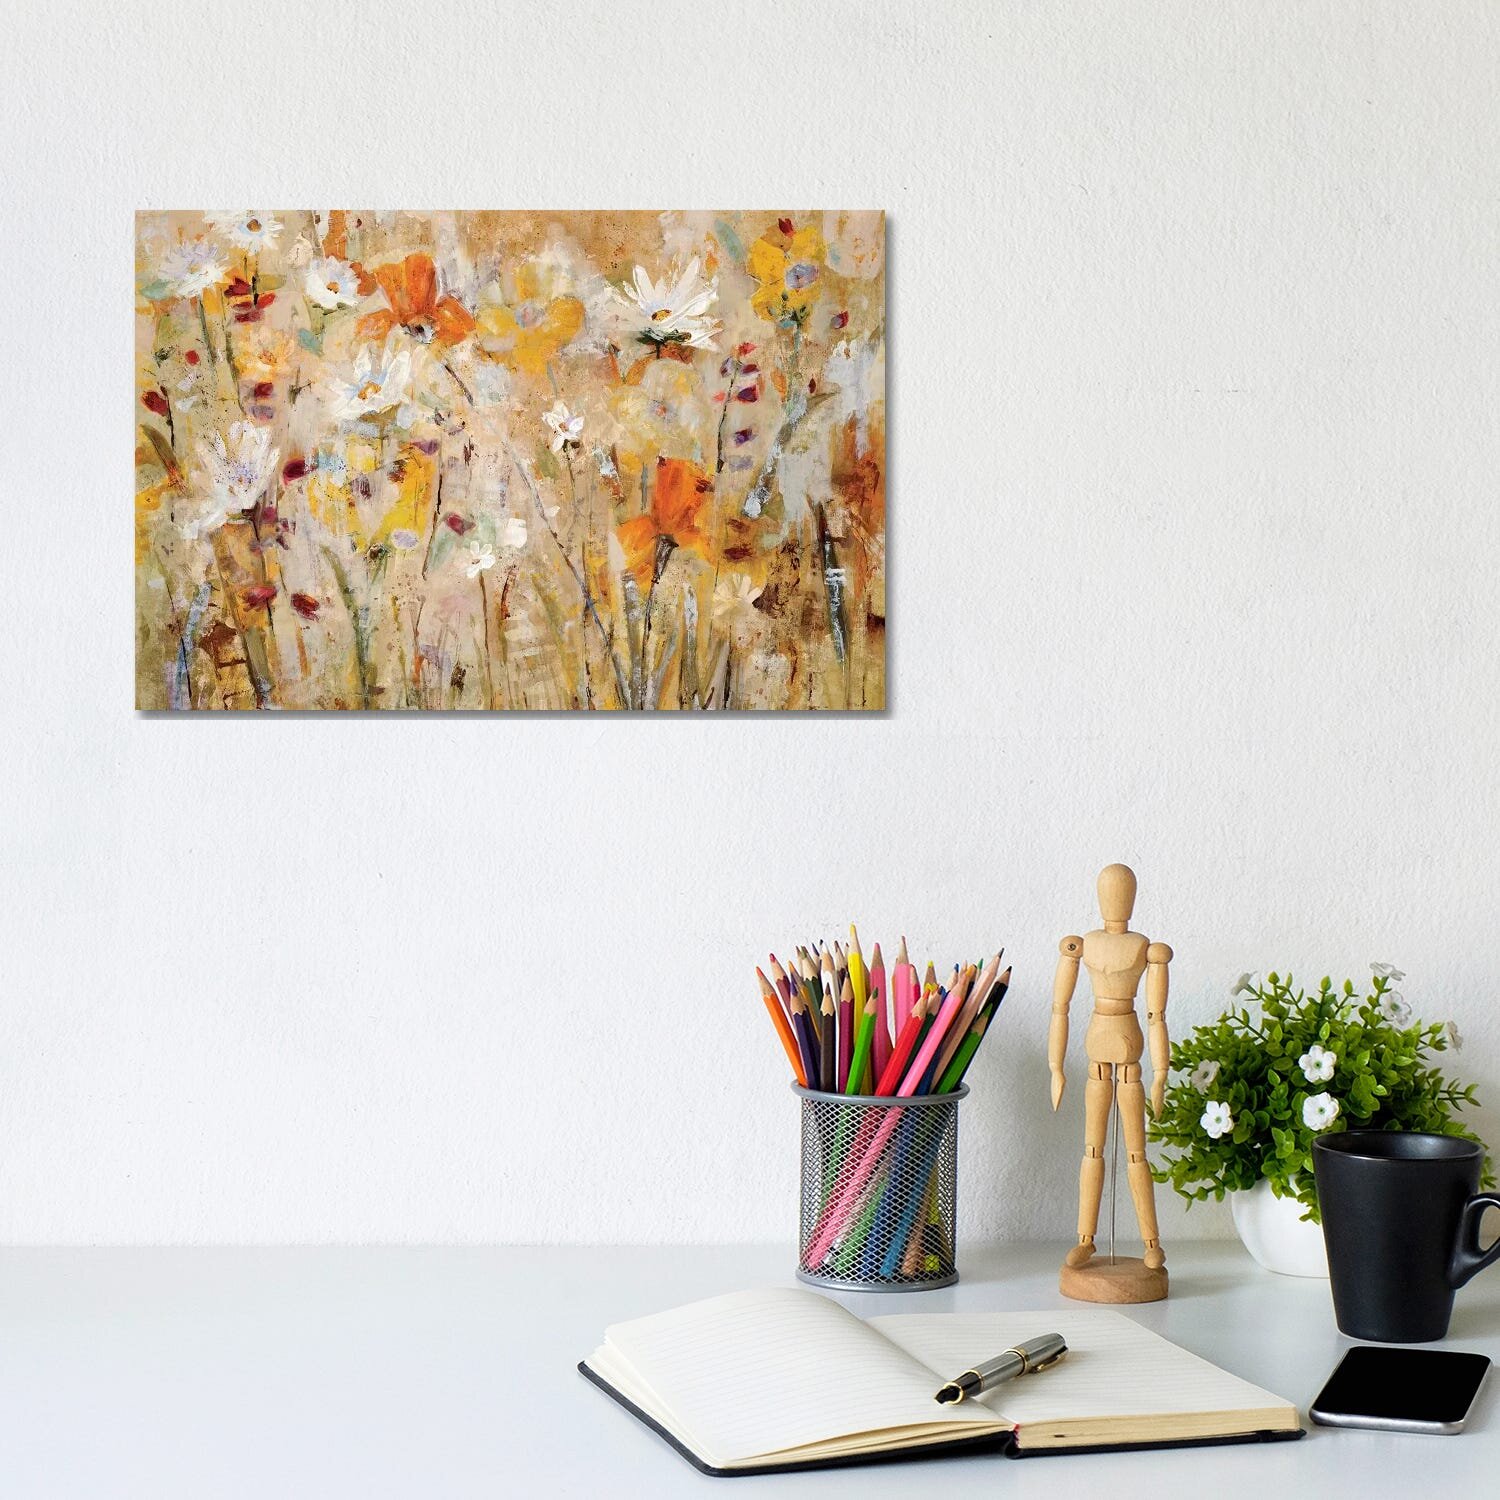 Three Posts Jostle by Panoramic Images - Wrapped Canvas Painting ...